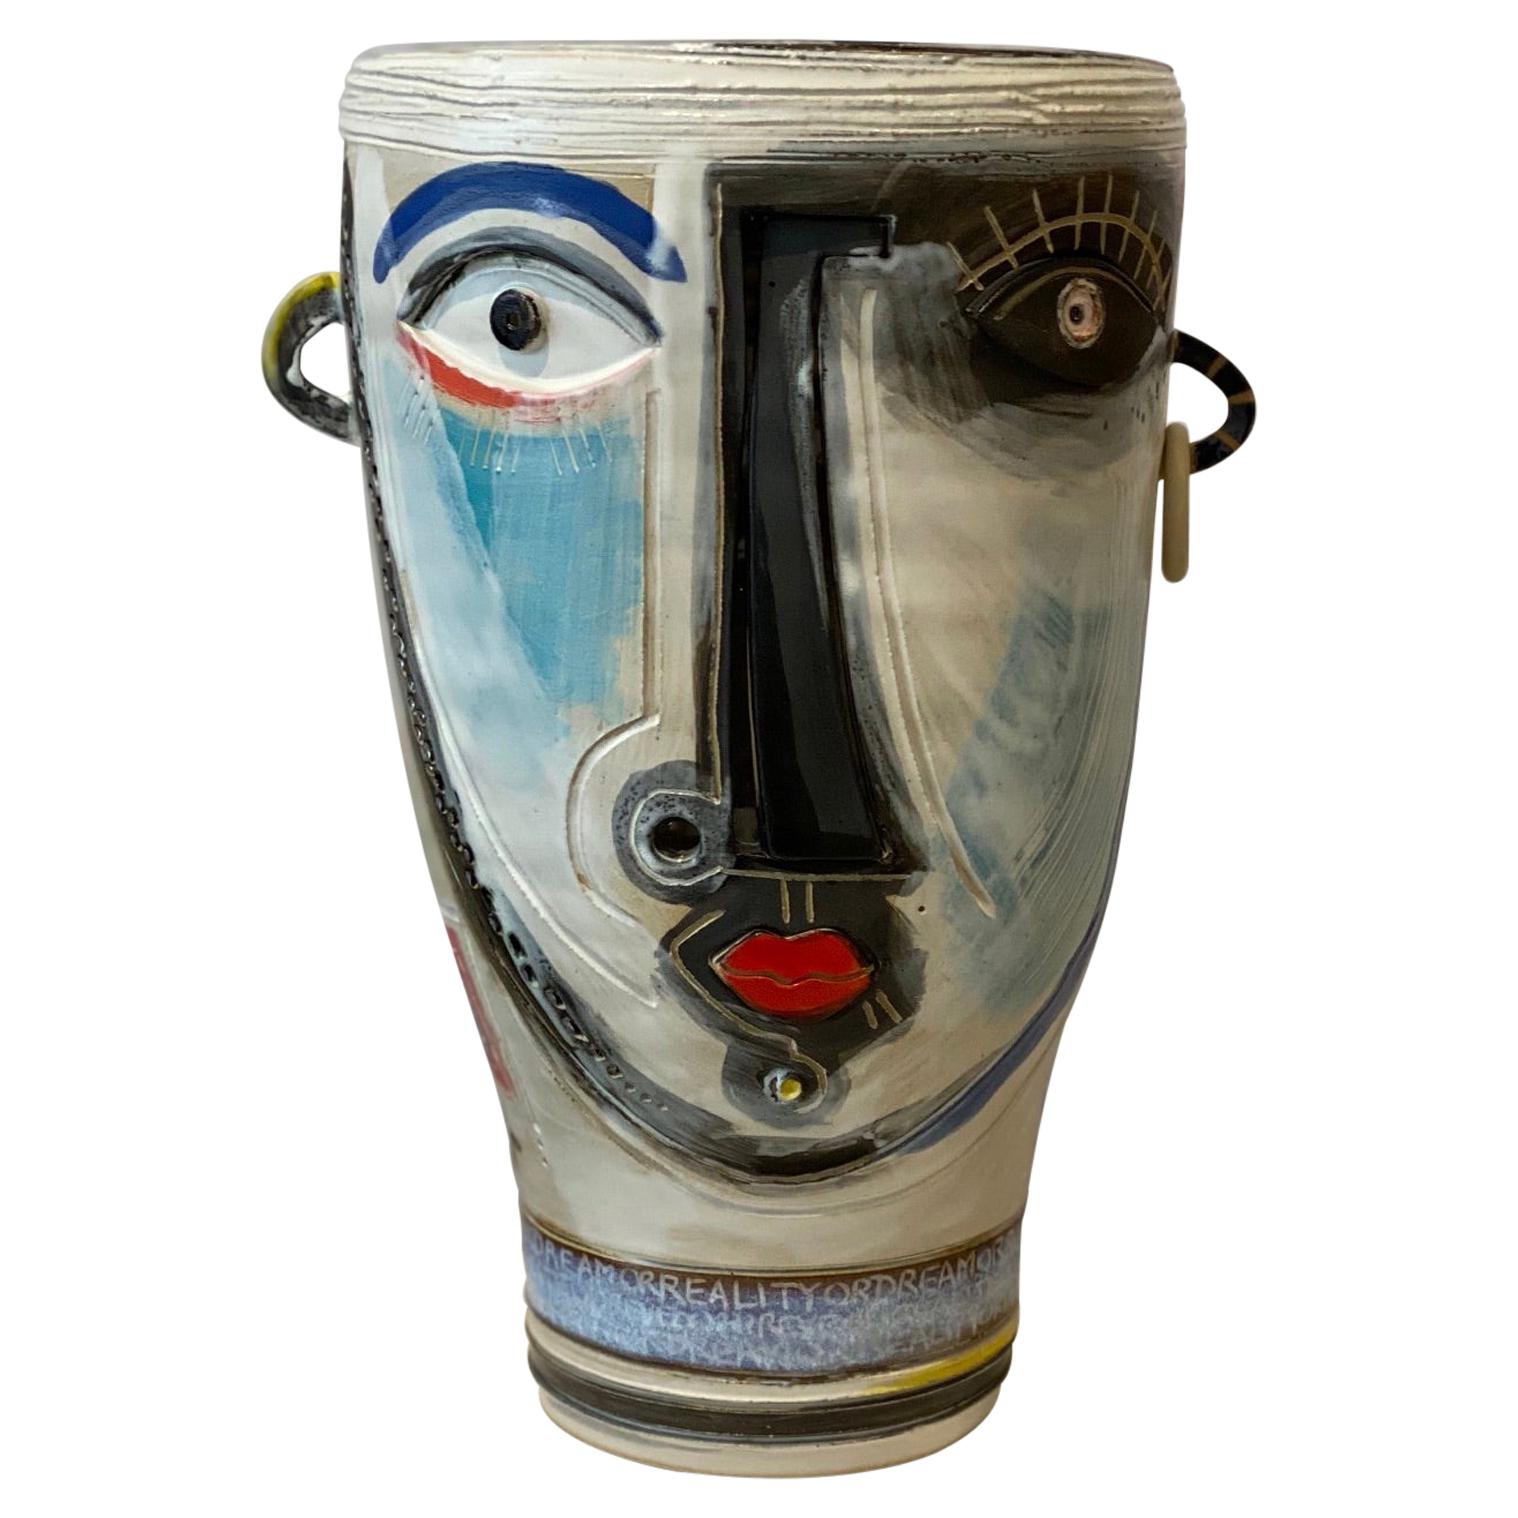 Ceramic Vase Sculpture One of a Kind Signed by Dalo